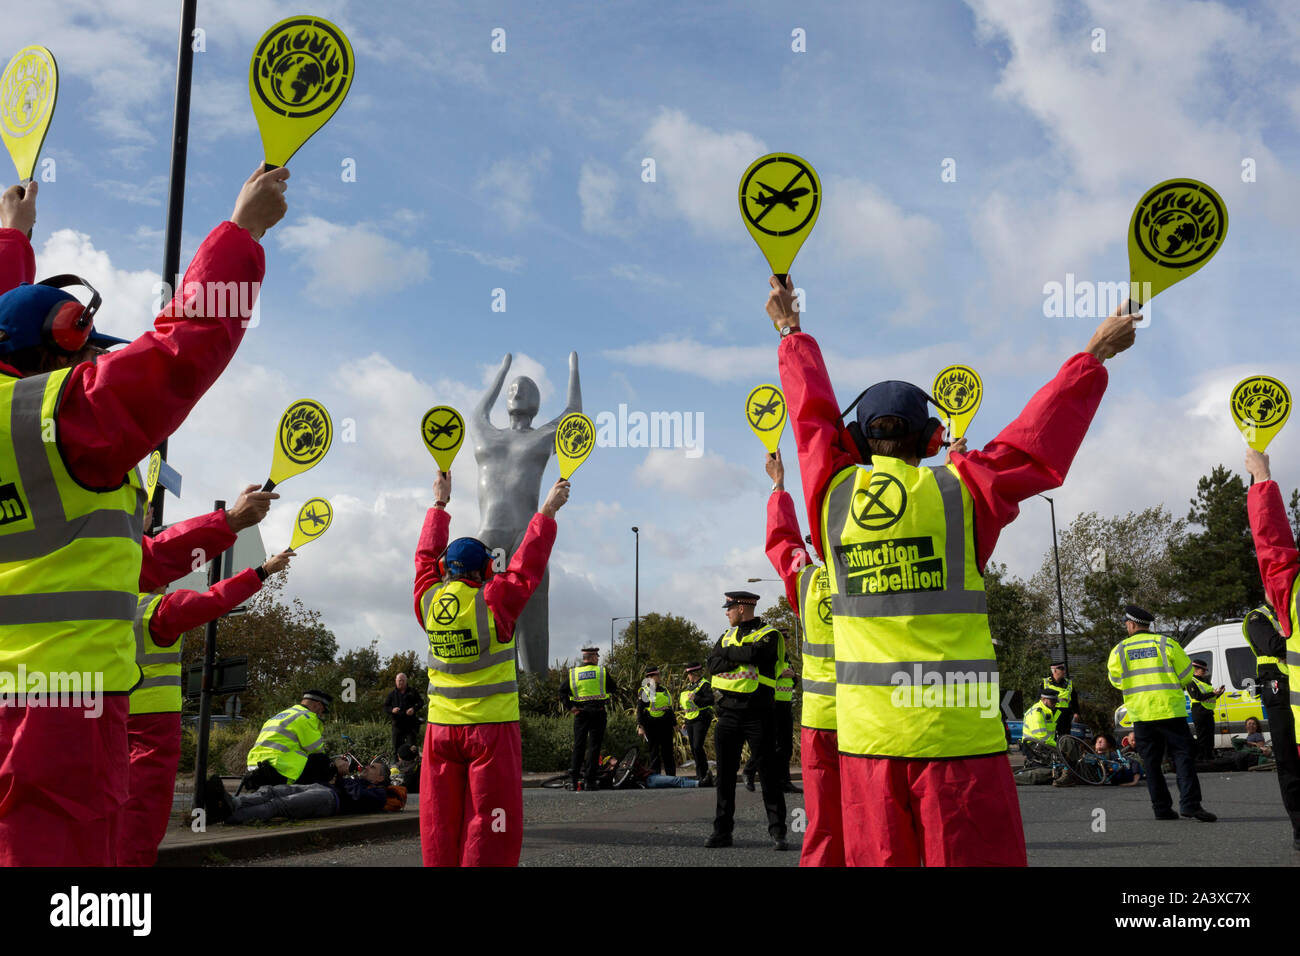 Environmental activist protest about Climate Change during the occupation of City Airport (London's Business Travel hub) in east London, the fourth day of a two-week prolonged worldwide protest by members of Extinction Rebellion, on 10th October 2019, in London, England. Stock Photo